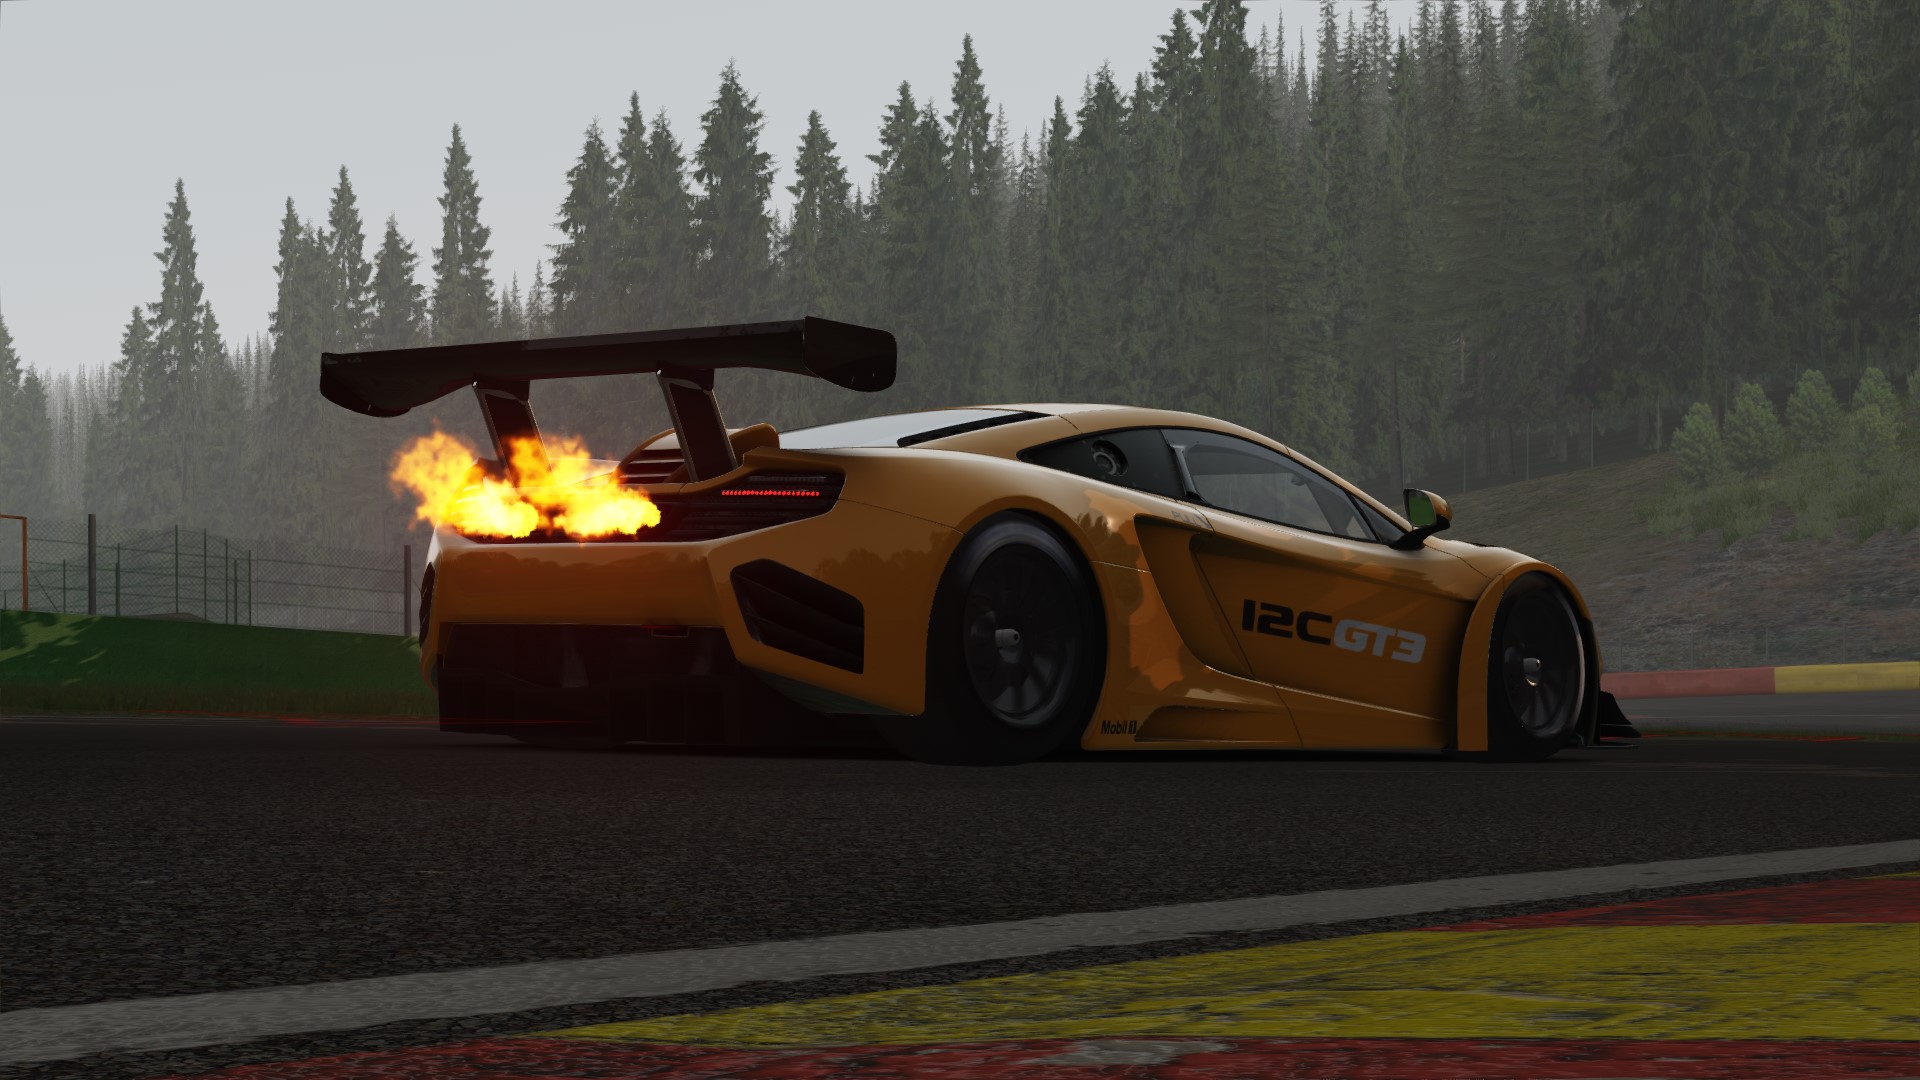 The McLaren MP4-12C spitting flames in vanilla Assetto Corsa. This would have been an easy shot with modern AC tools, but not the original photo mode.